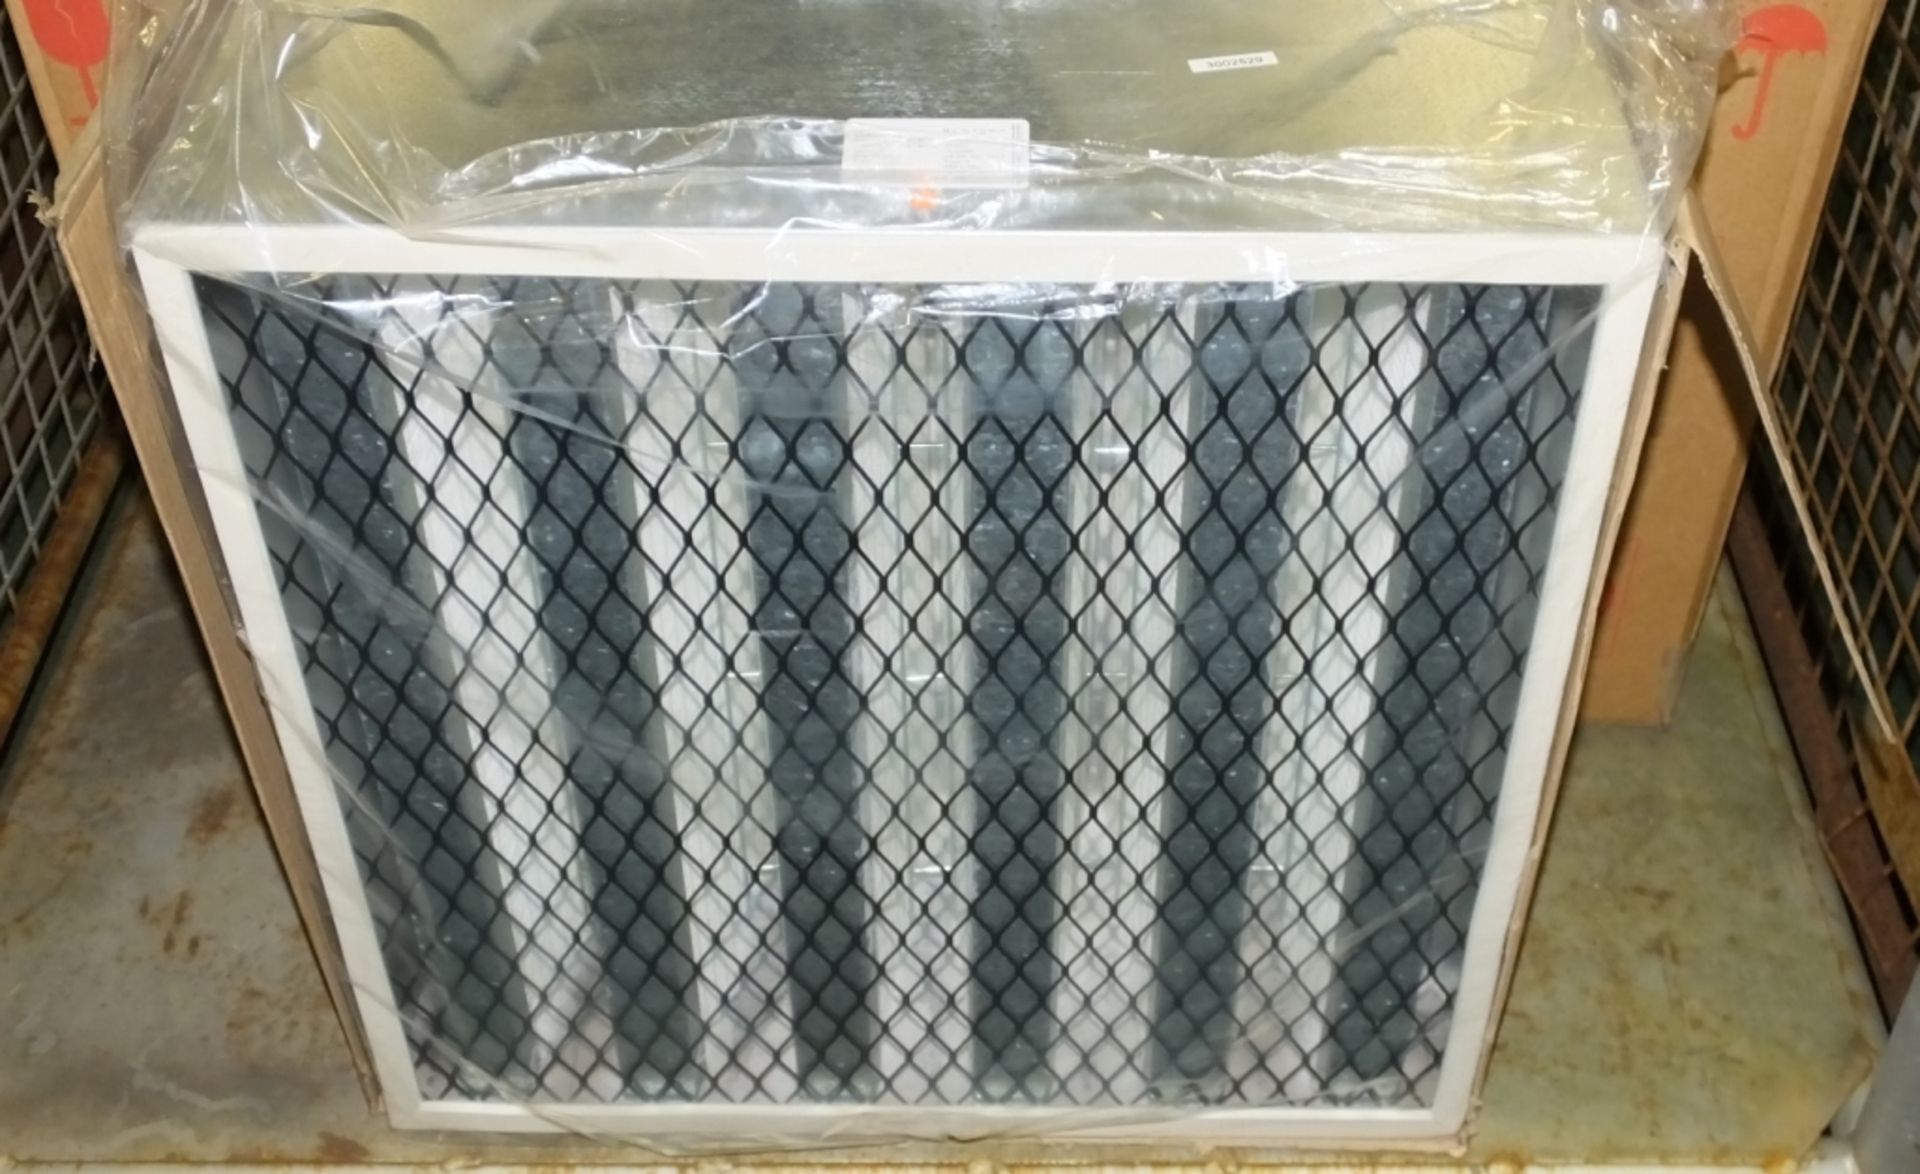 4x MC Air Filtration Air Elements - type II - AESS 30-93401 - Image 2 of 3